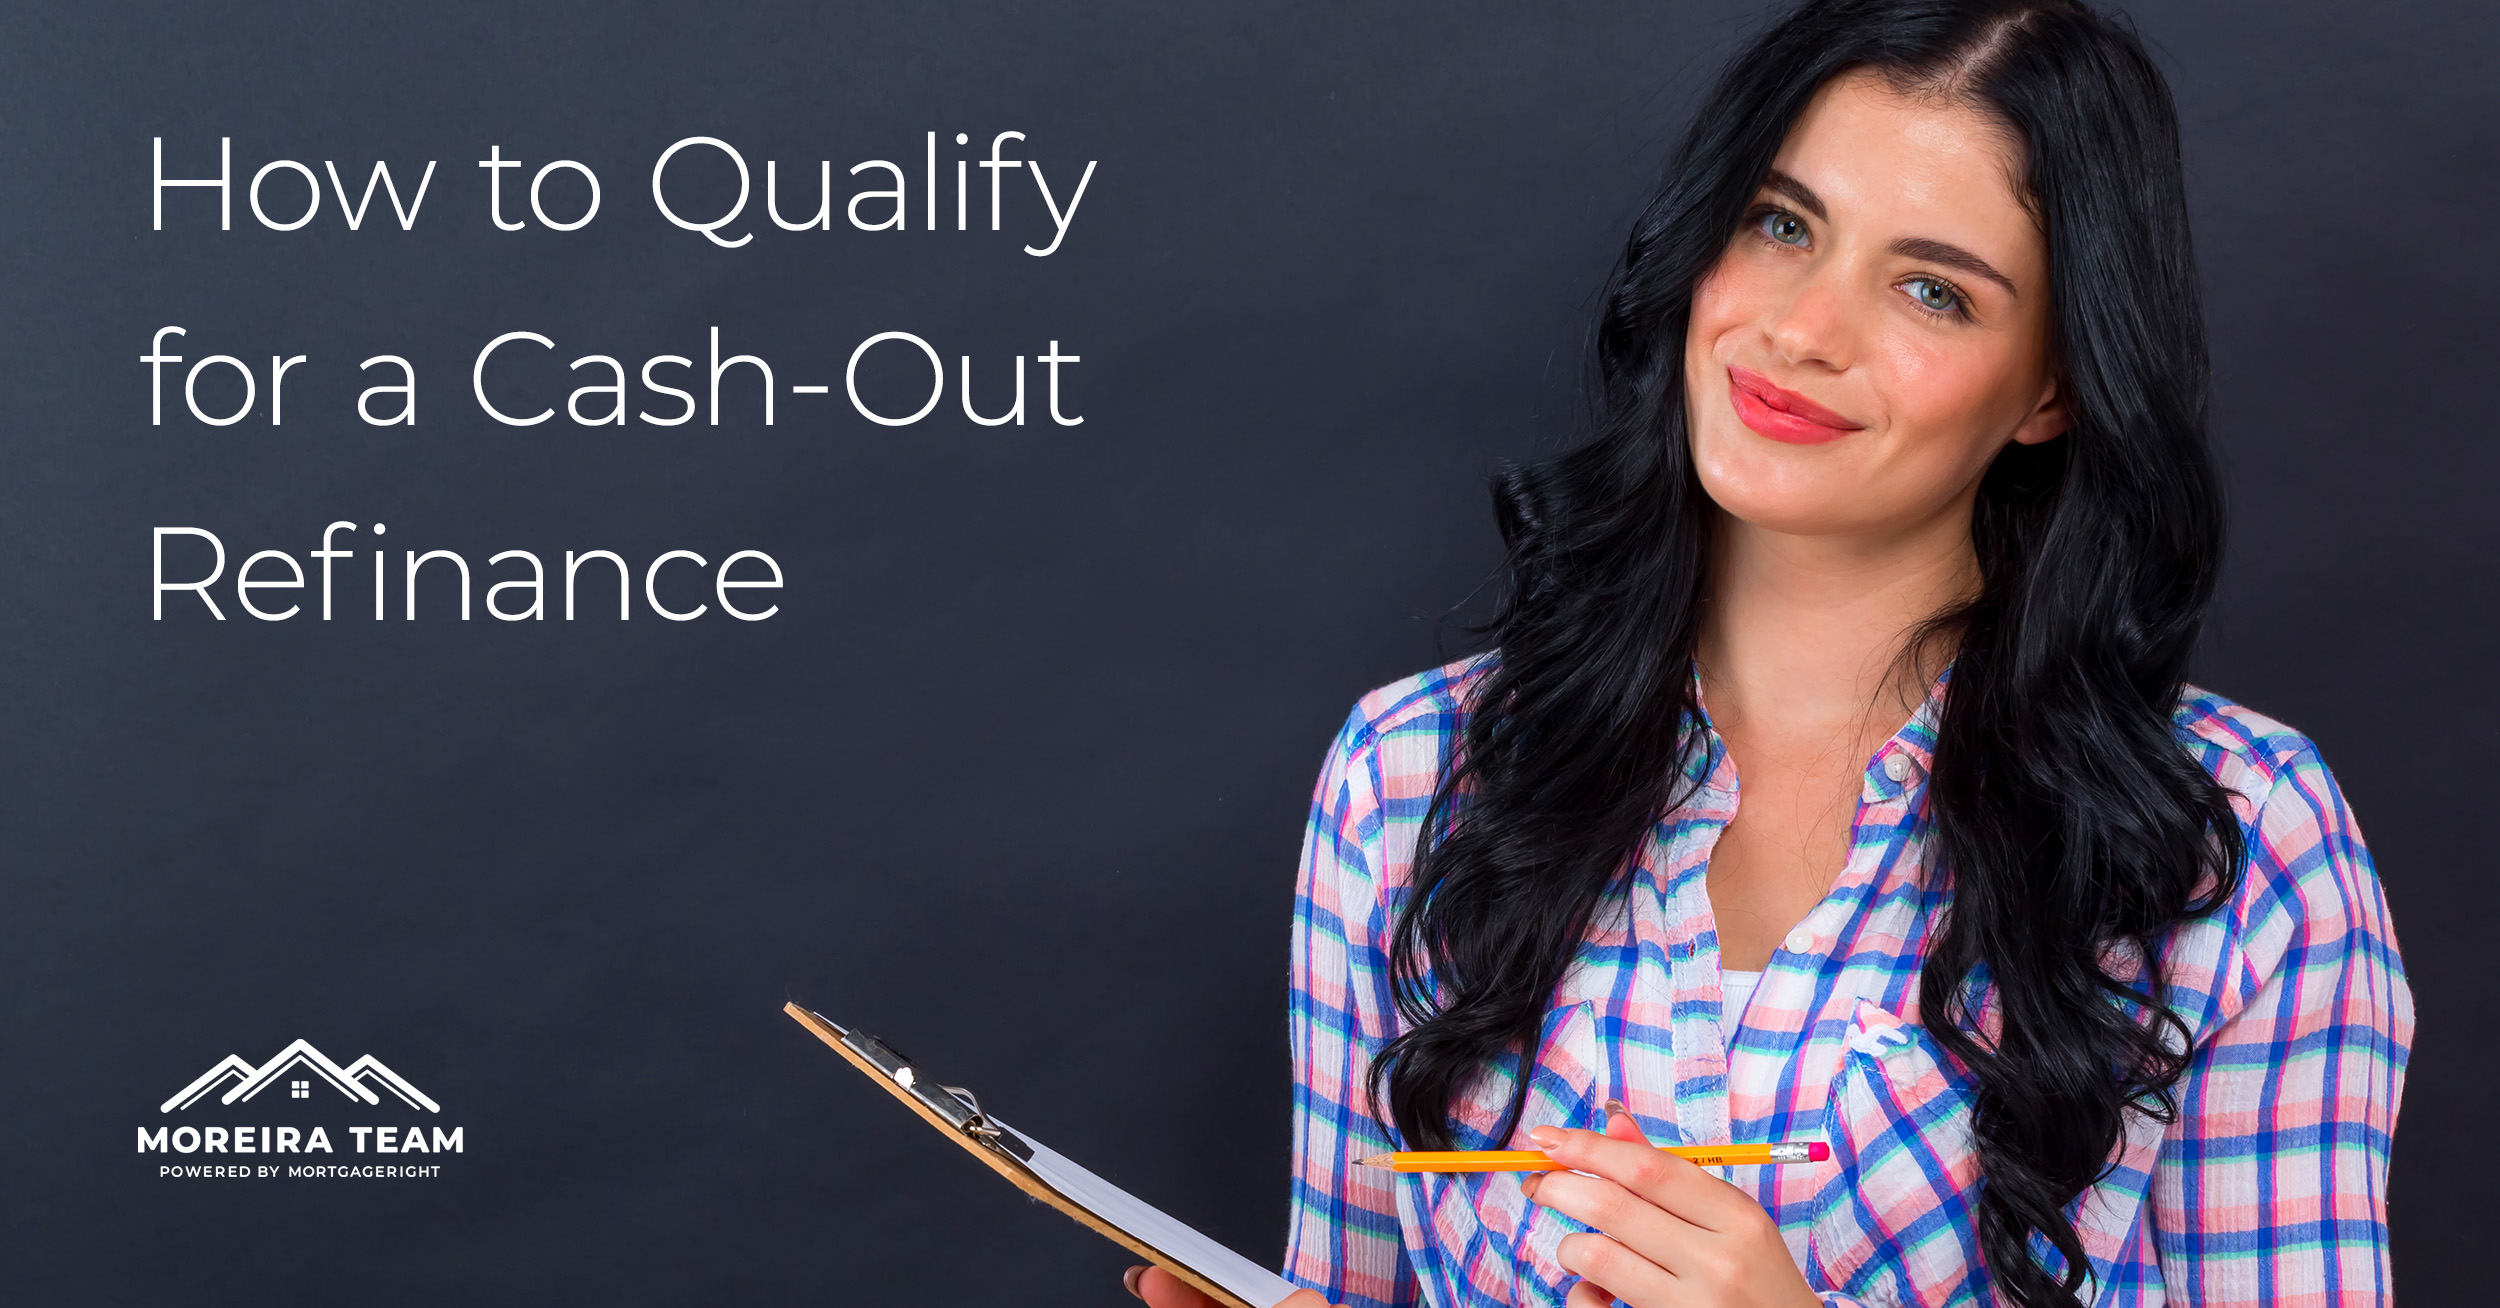 How to Qualify for a Cash-Out Refinance